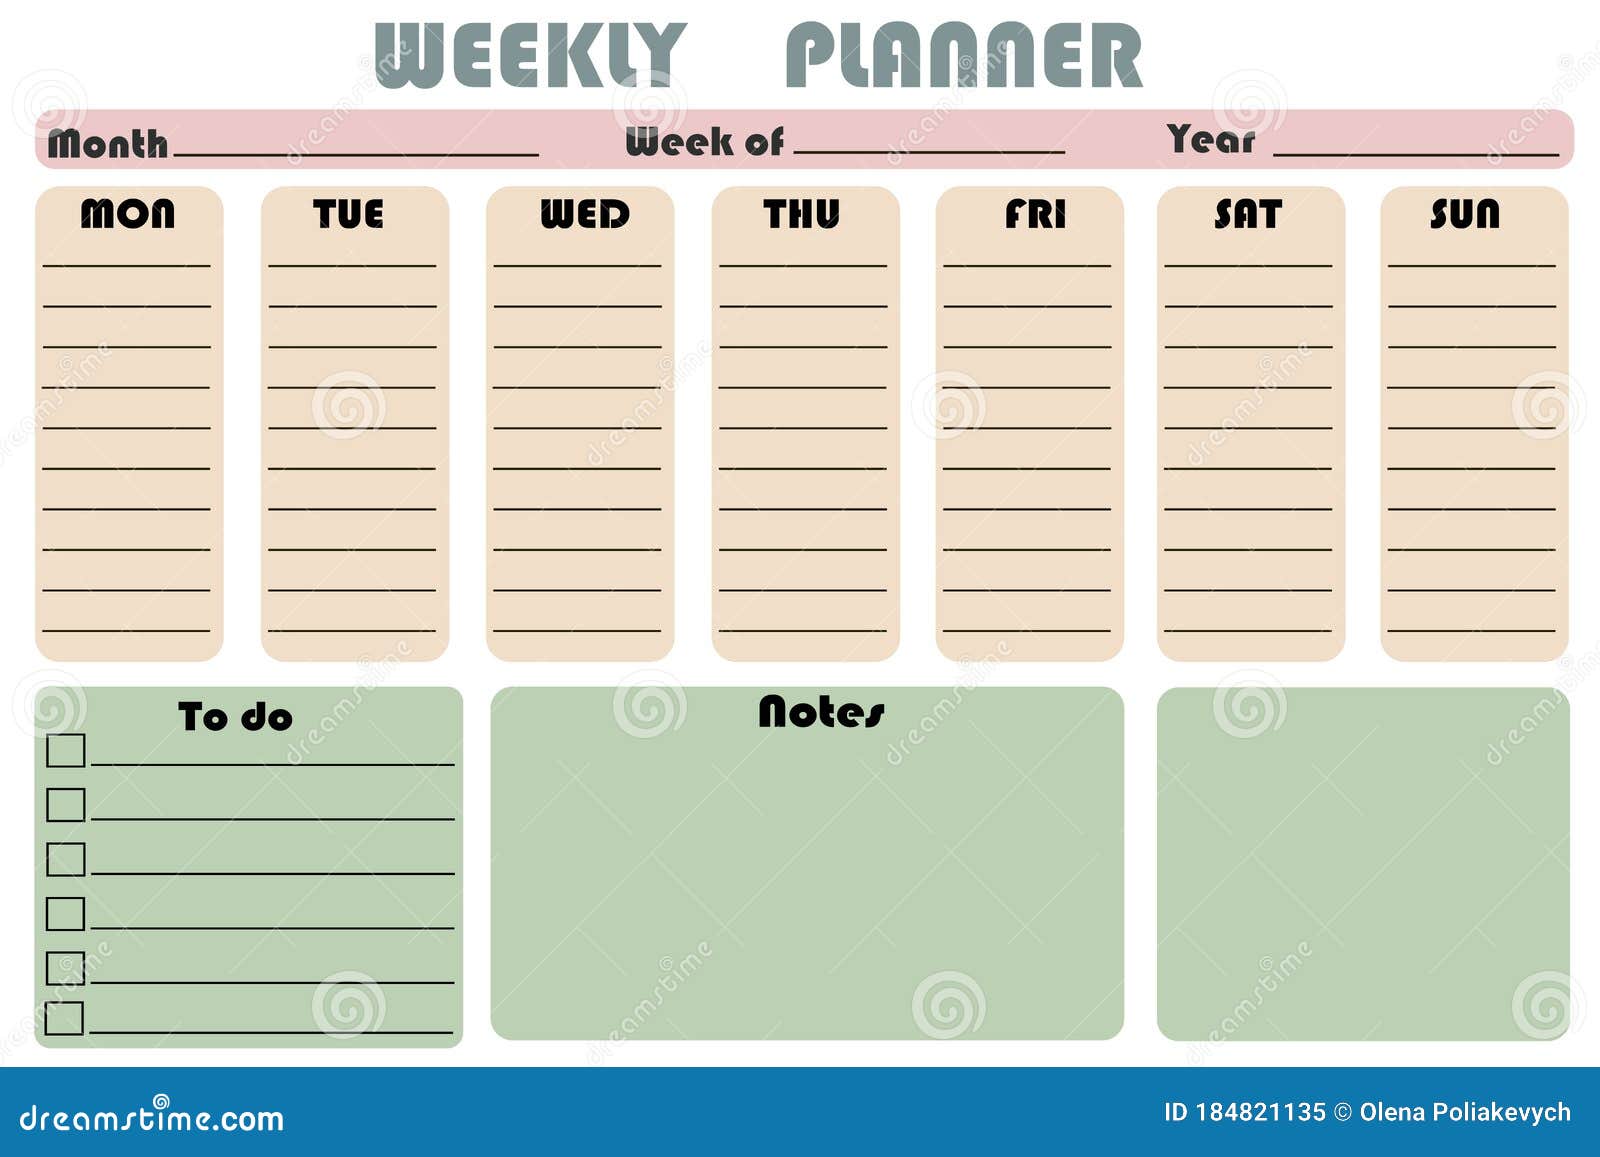 Monthly Agenda Template from thumbs.dreamstime.com